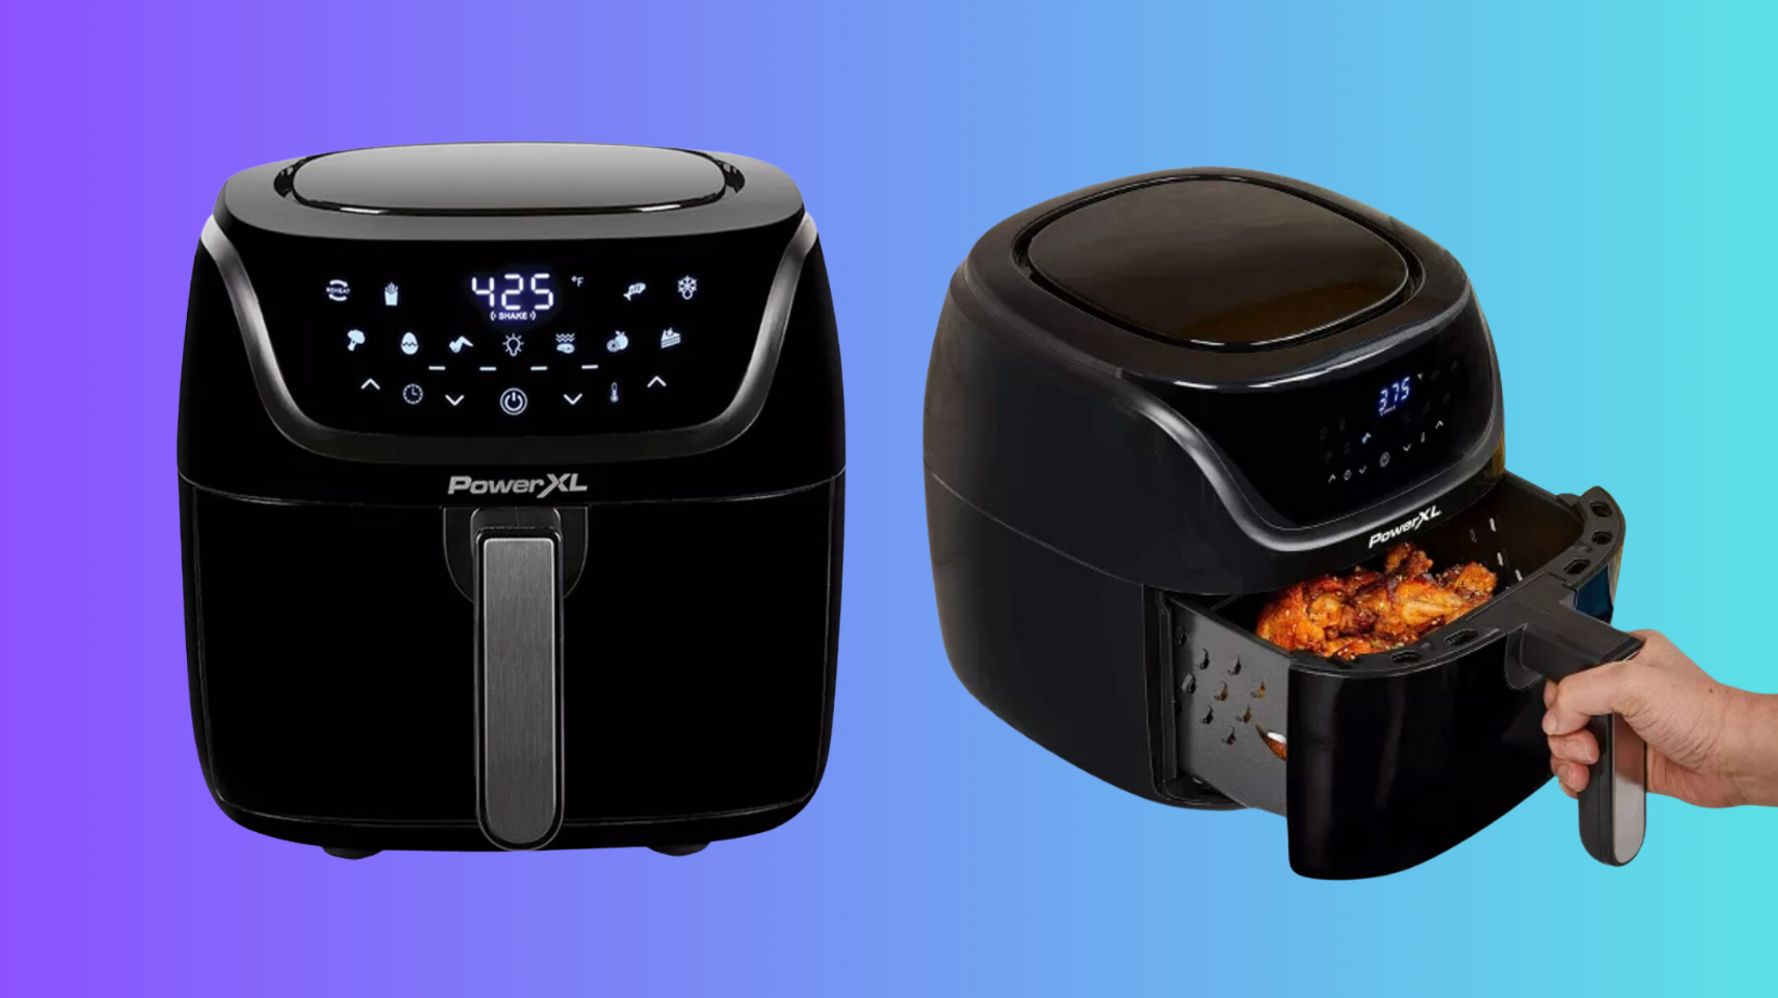 The Instant Pot Air Fryer Is on Sale for Less Than $50 at